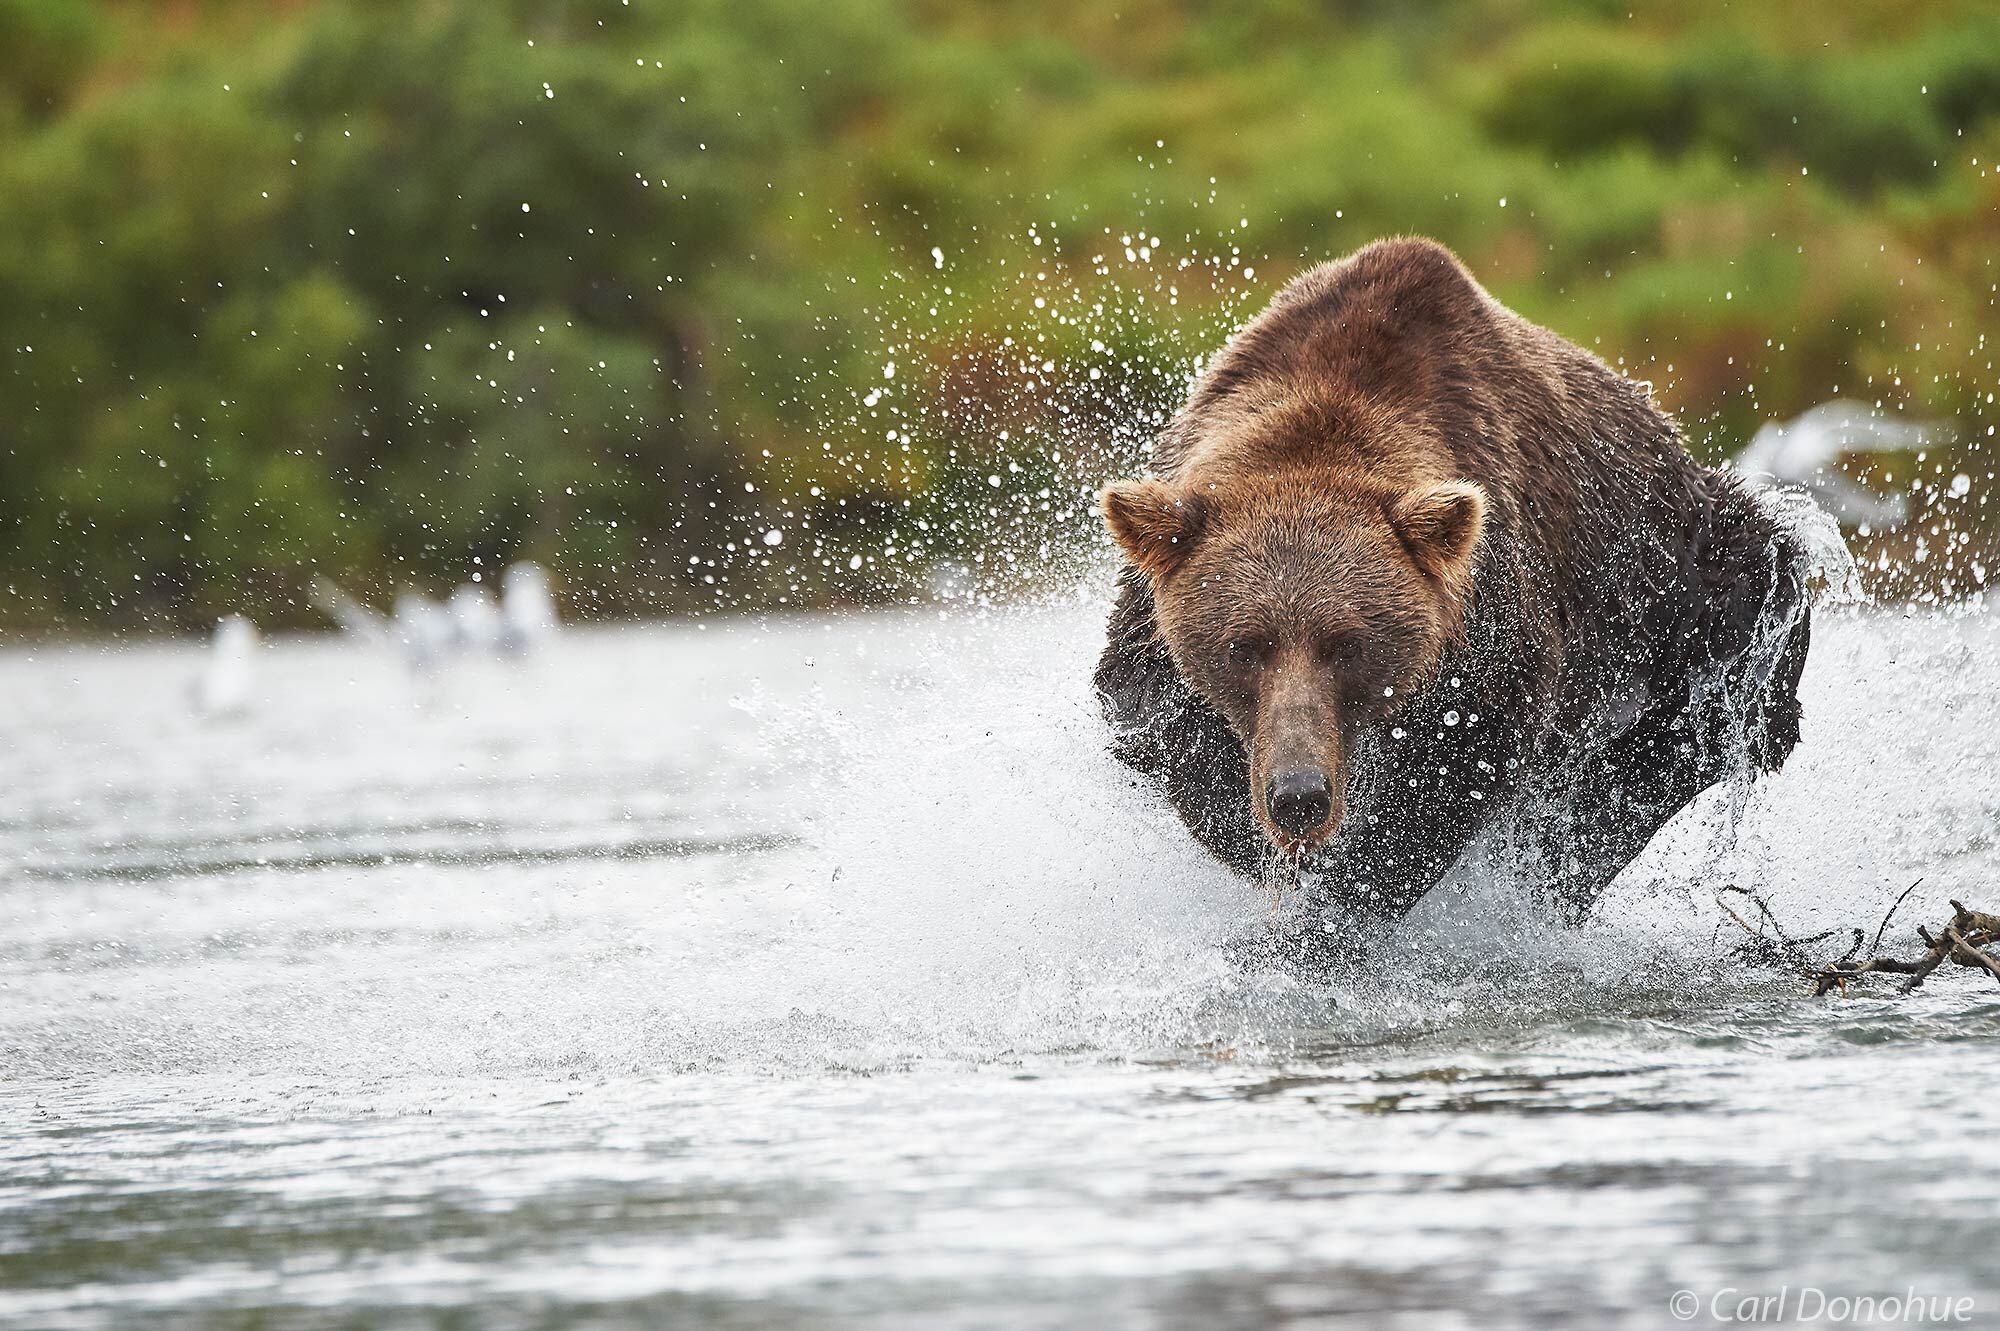 A female brown bear hot on the tail of a spawning salmon in a shallow stream, Katmai National Park and Preserve, Alaska.